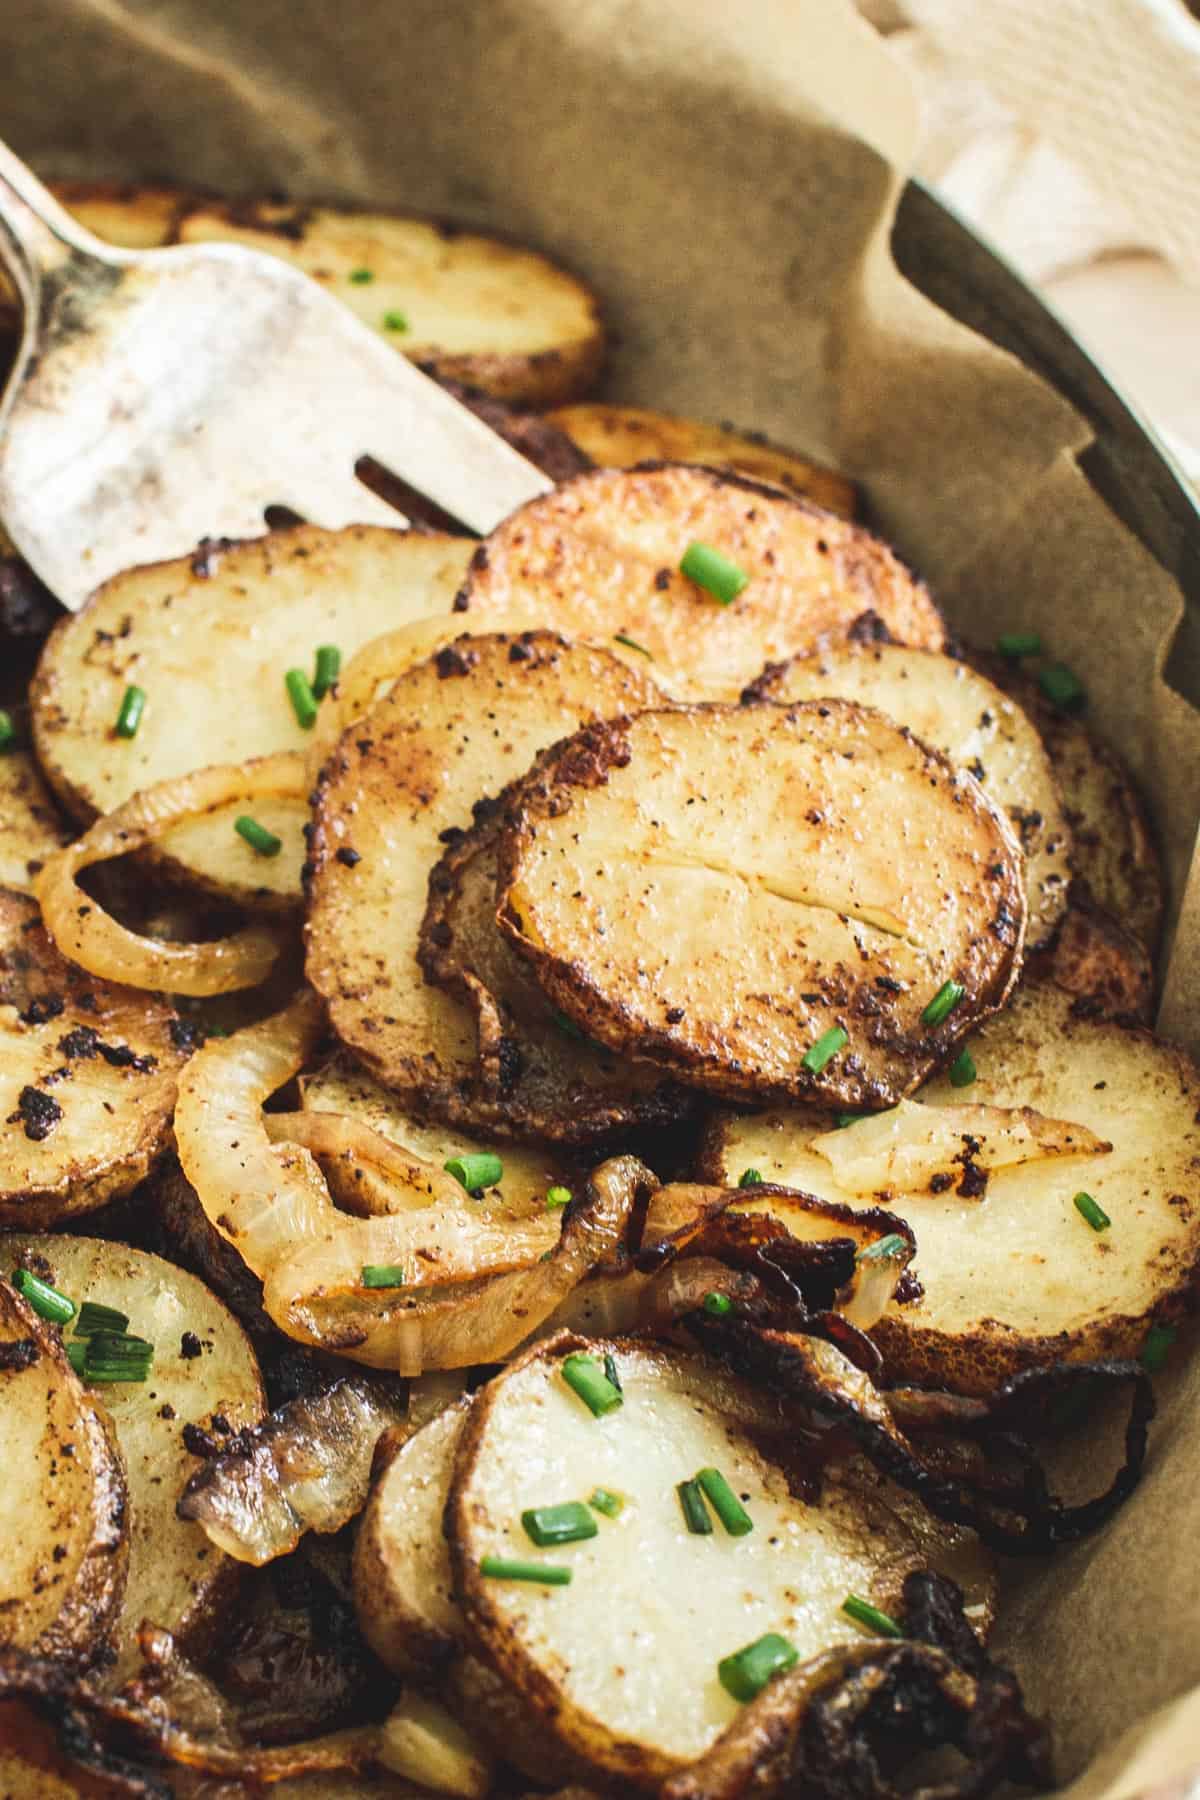 Fried potatoes and onions topped with fresh chives.